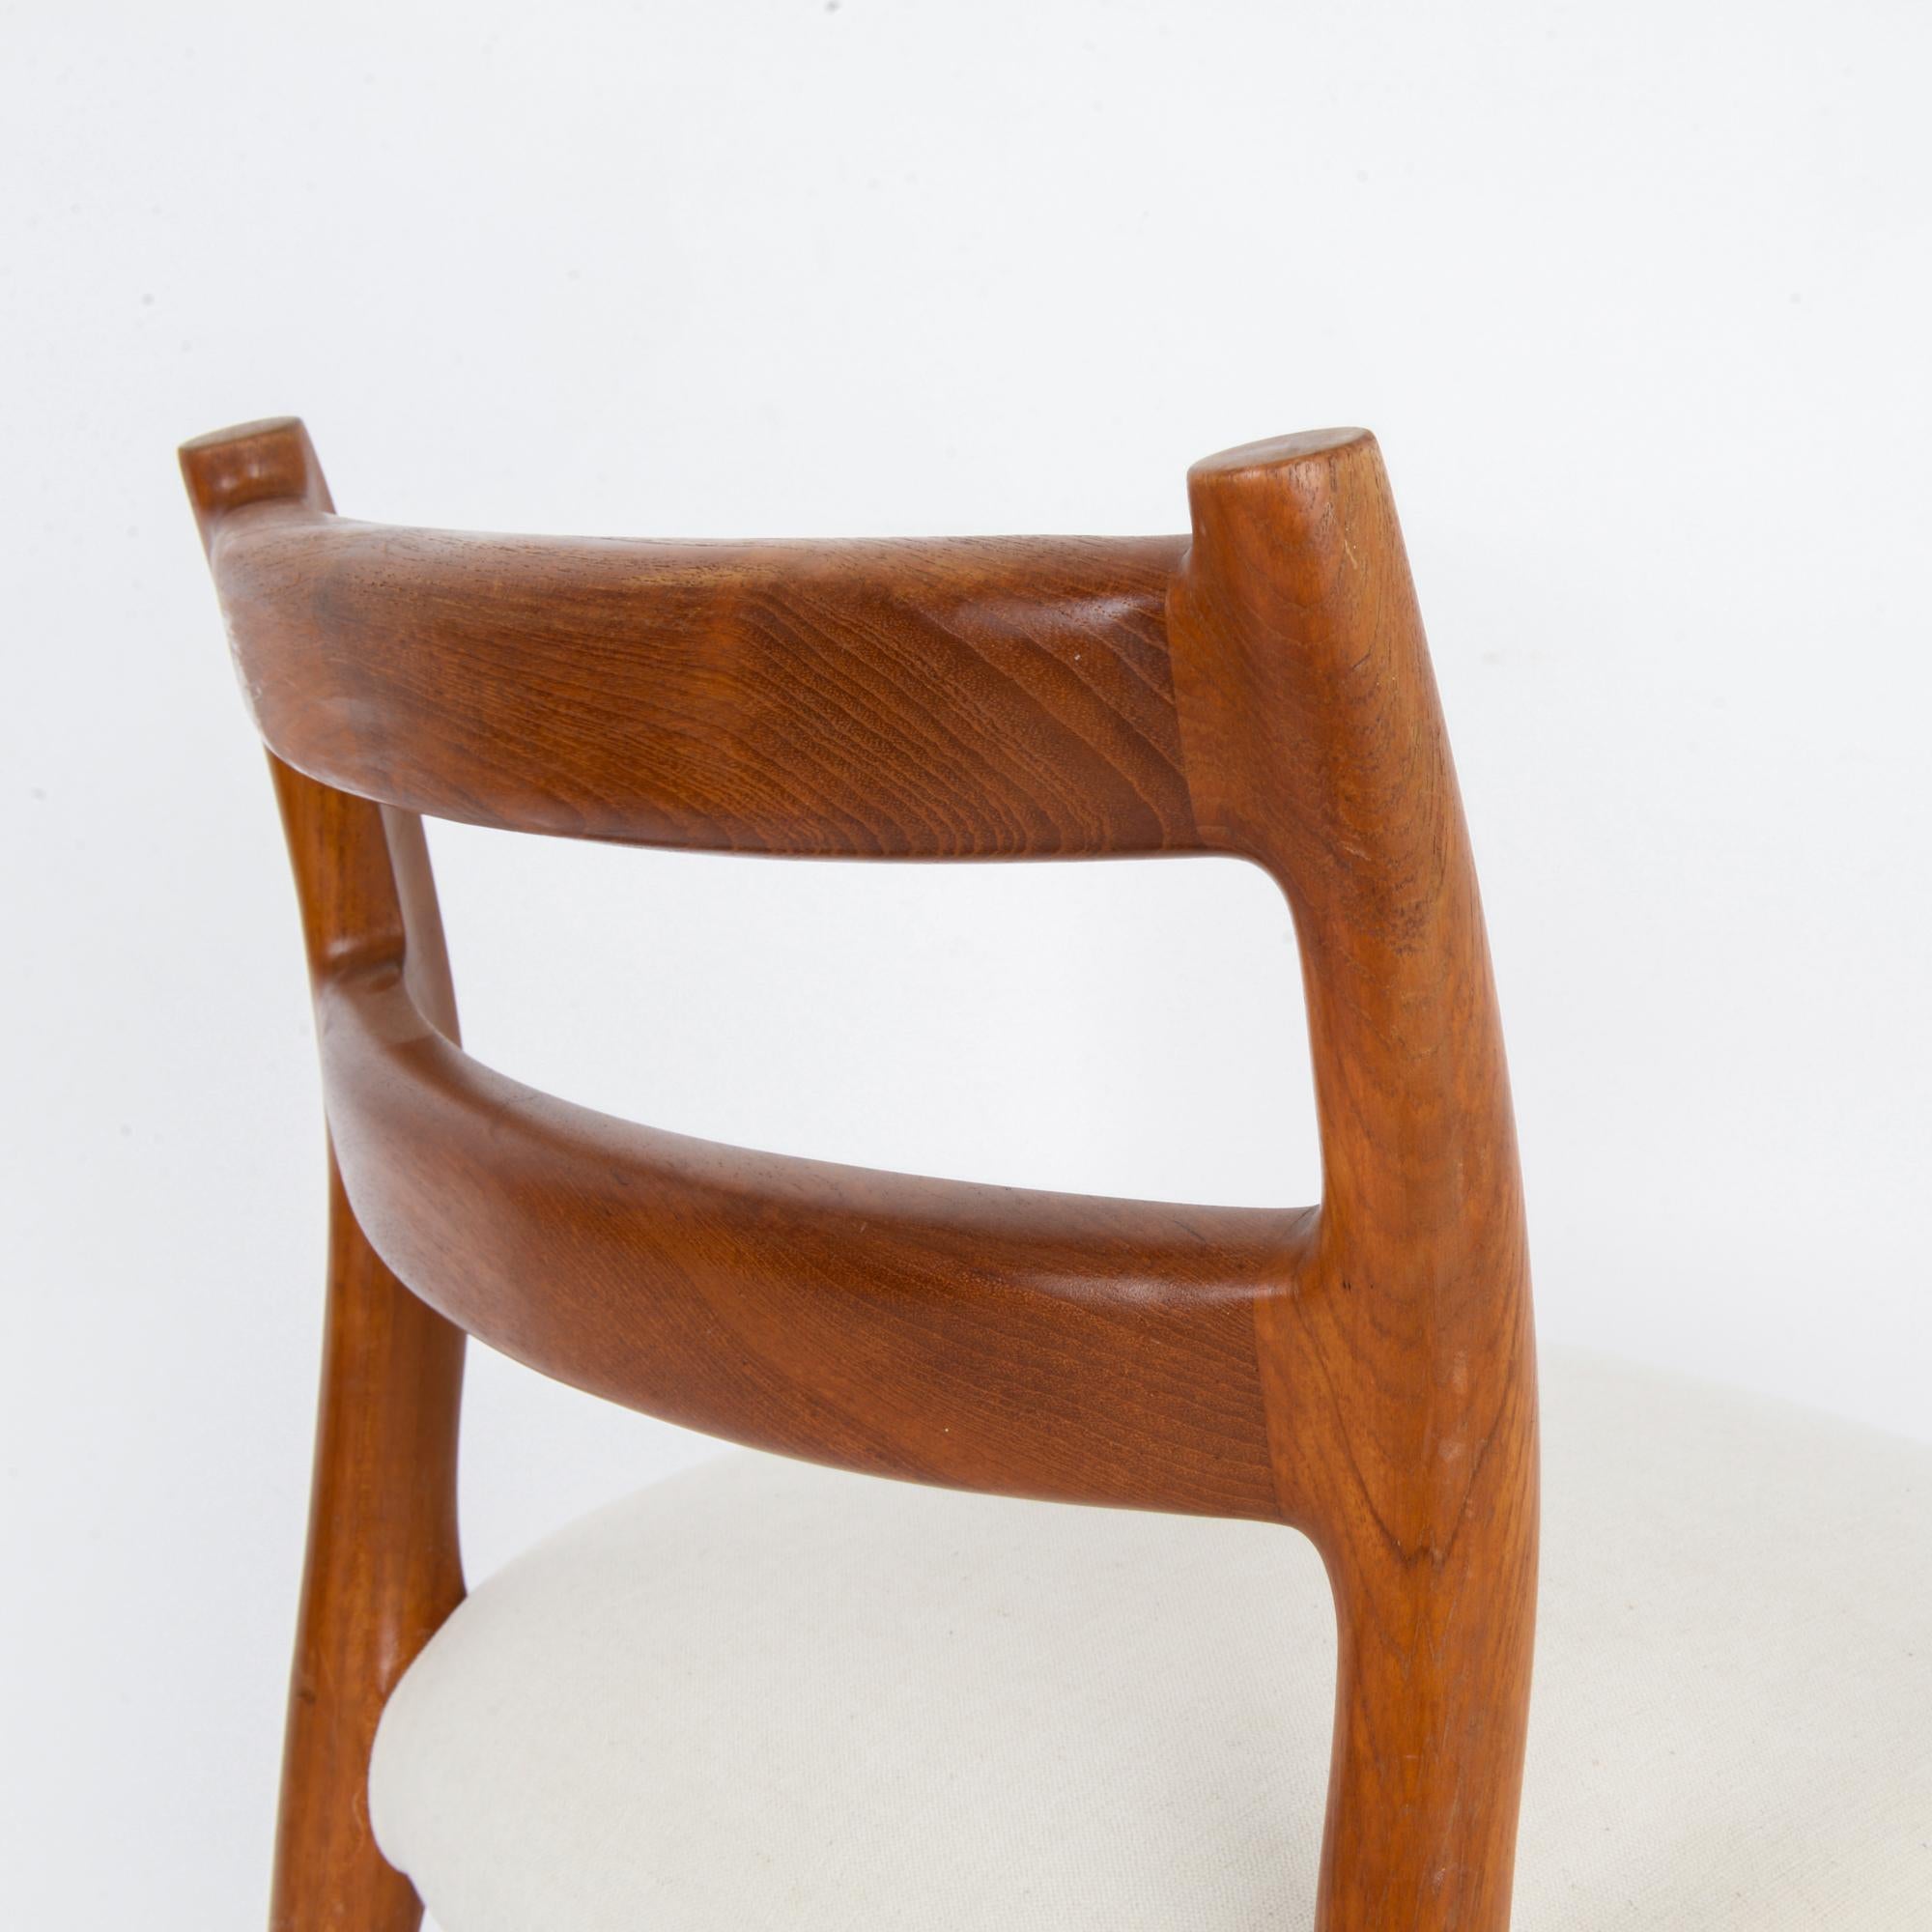 Upholstery 1960s Danish Wooden Chair with Upholstered Seat For Sale